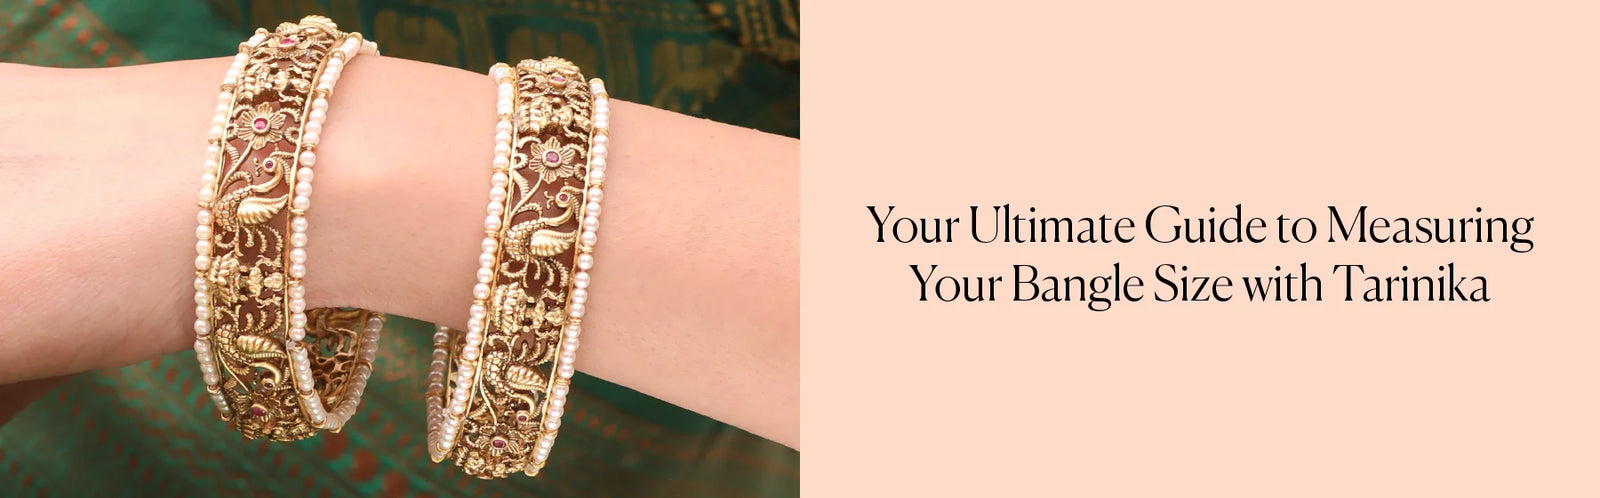 The Ultimate Guide to Measuring Your Bangle Size with Tarinika